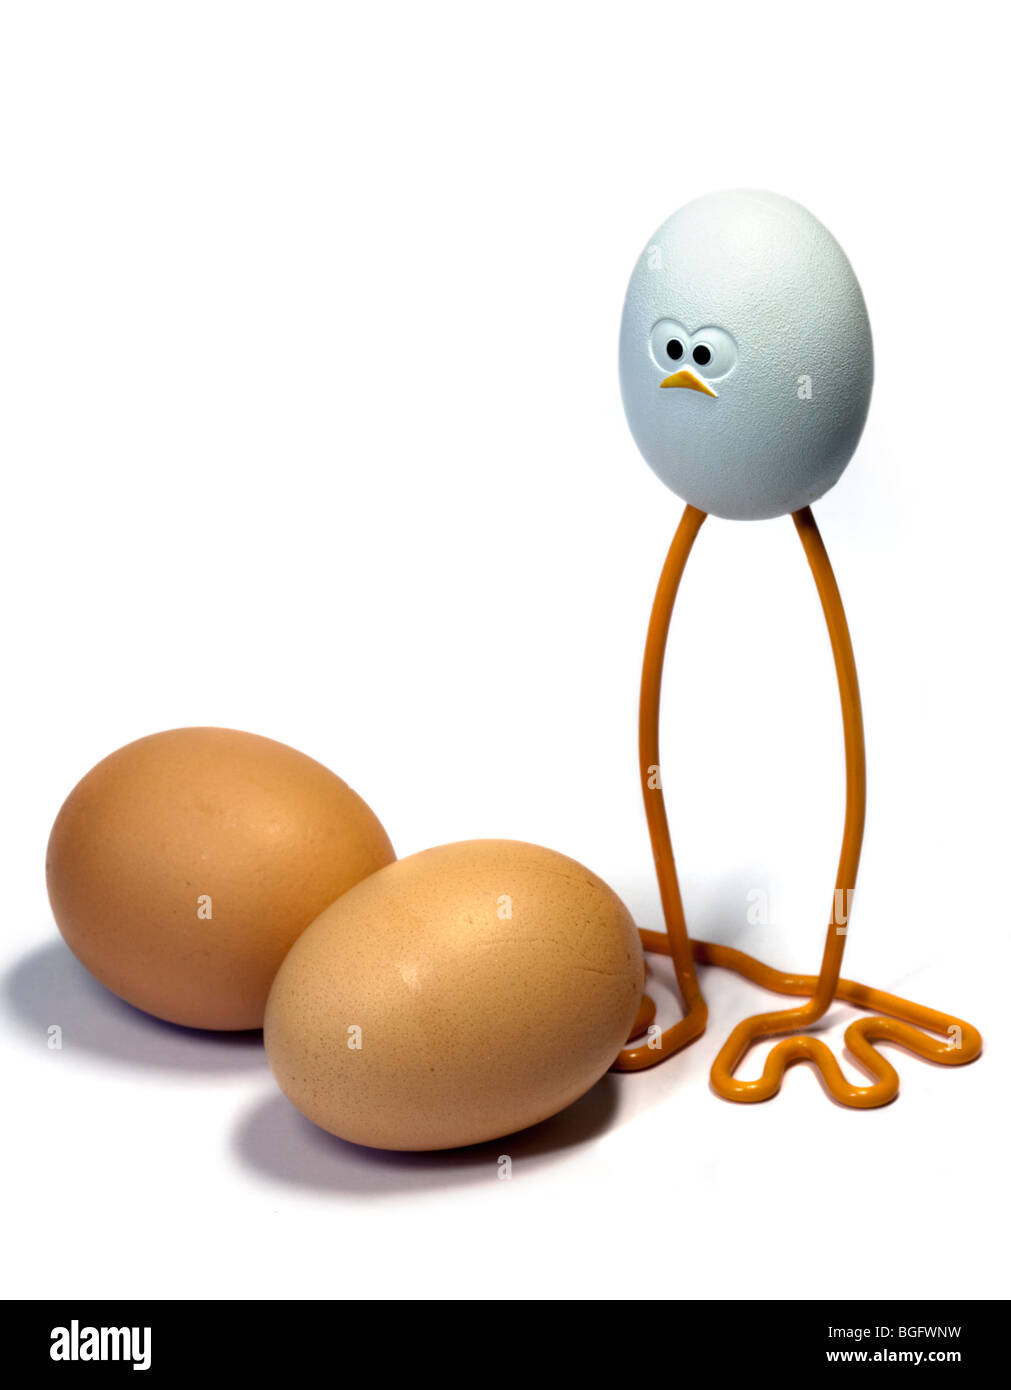 Brown Eggs and Novelty Egg Masher Stock Photo